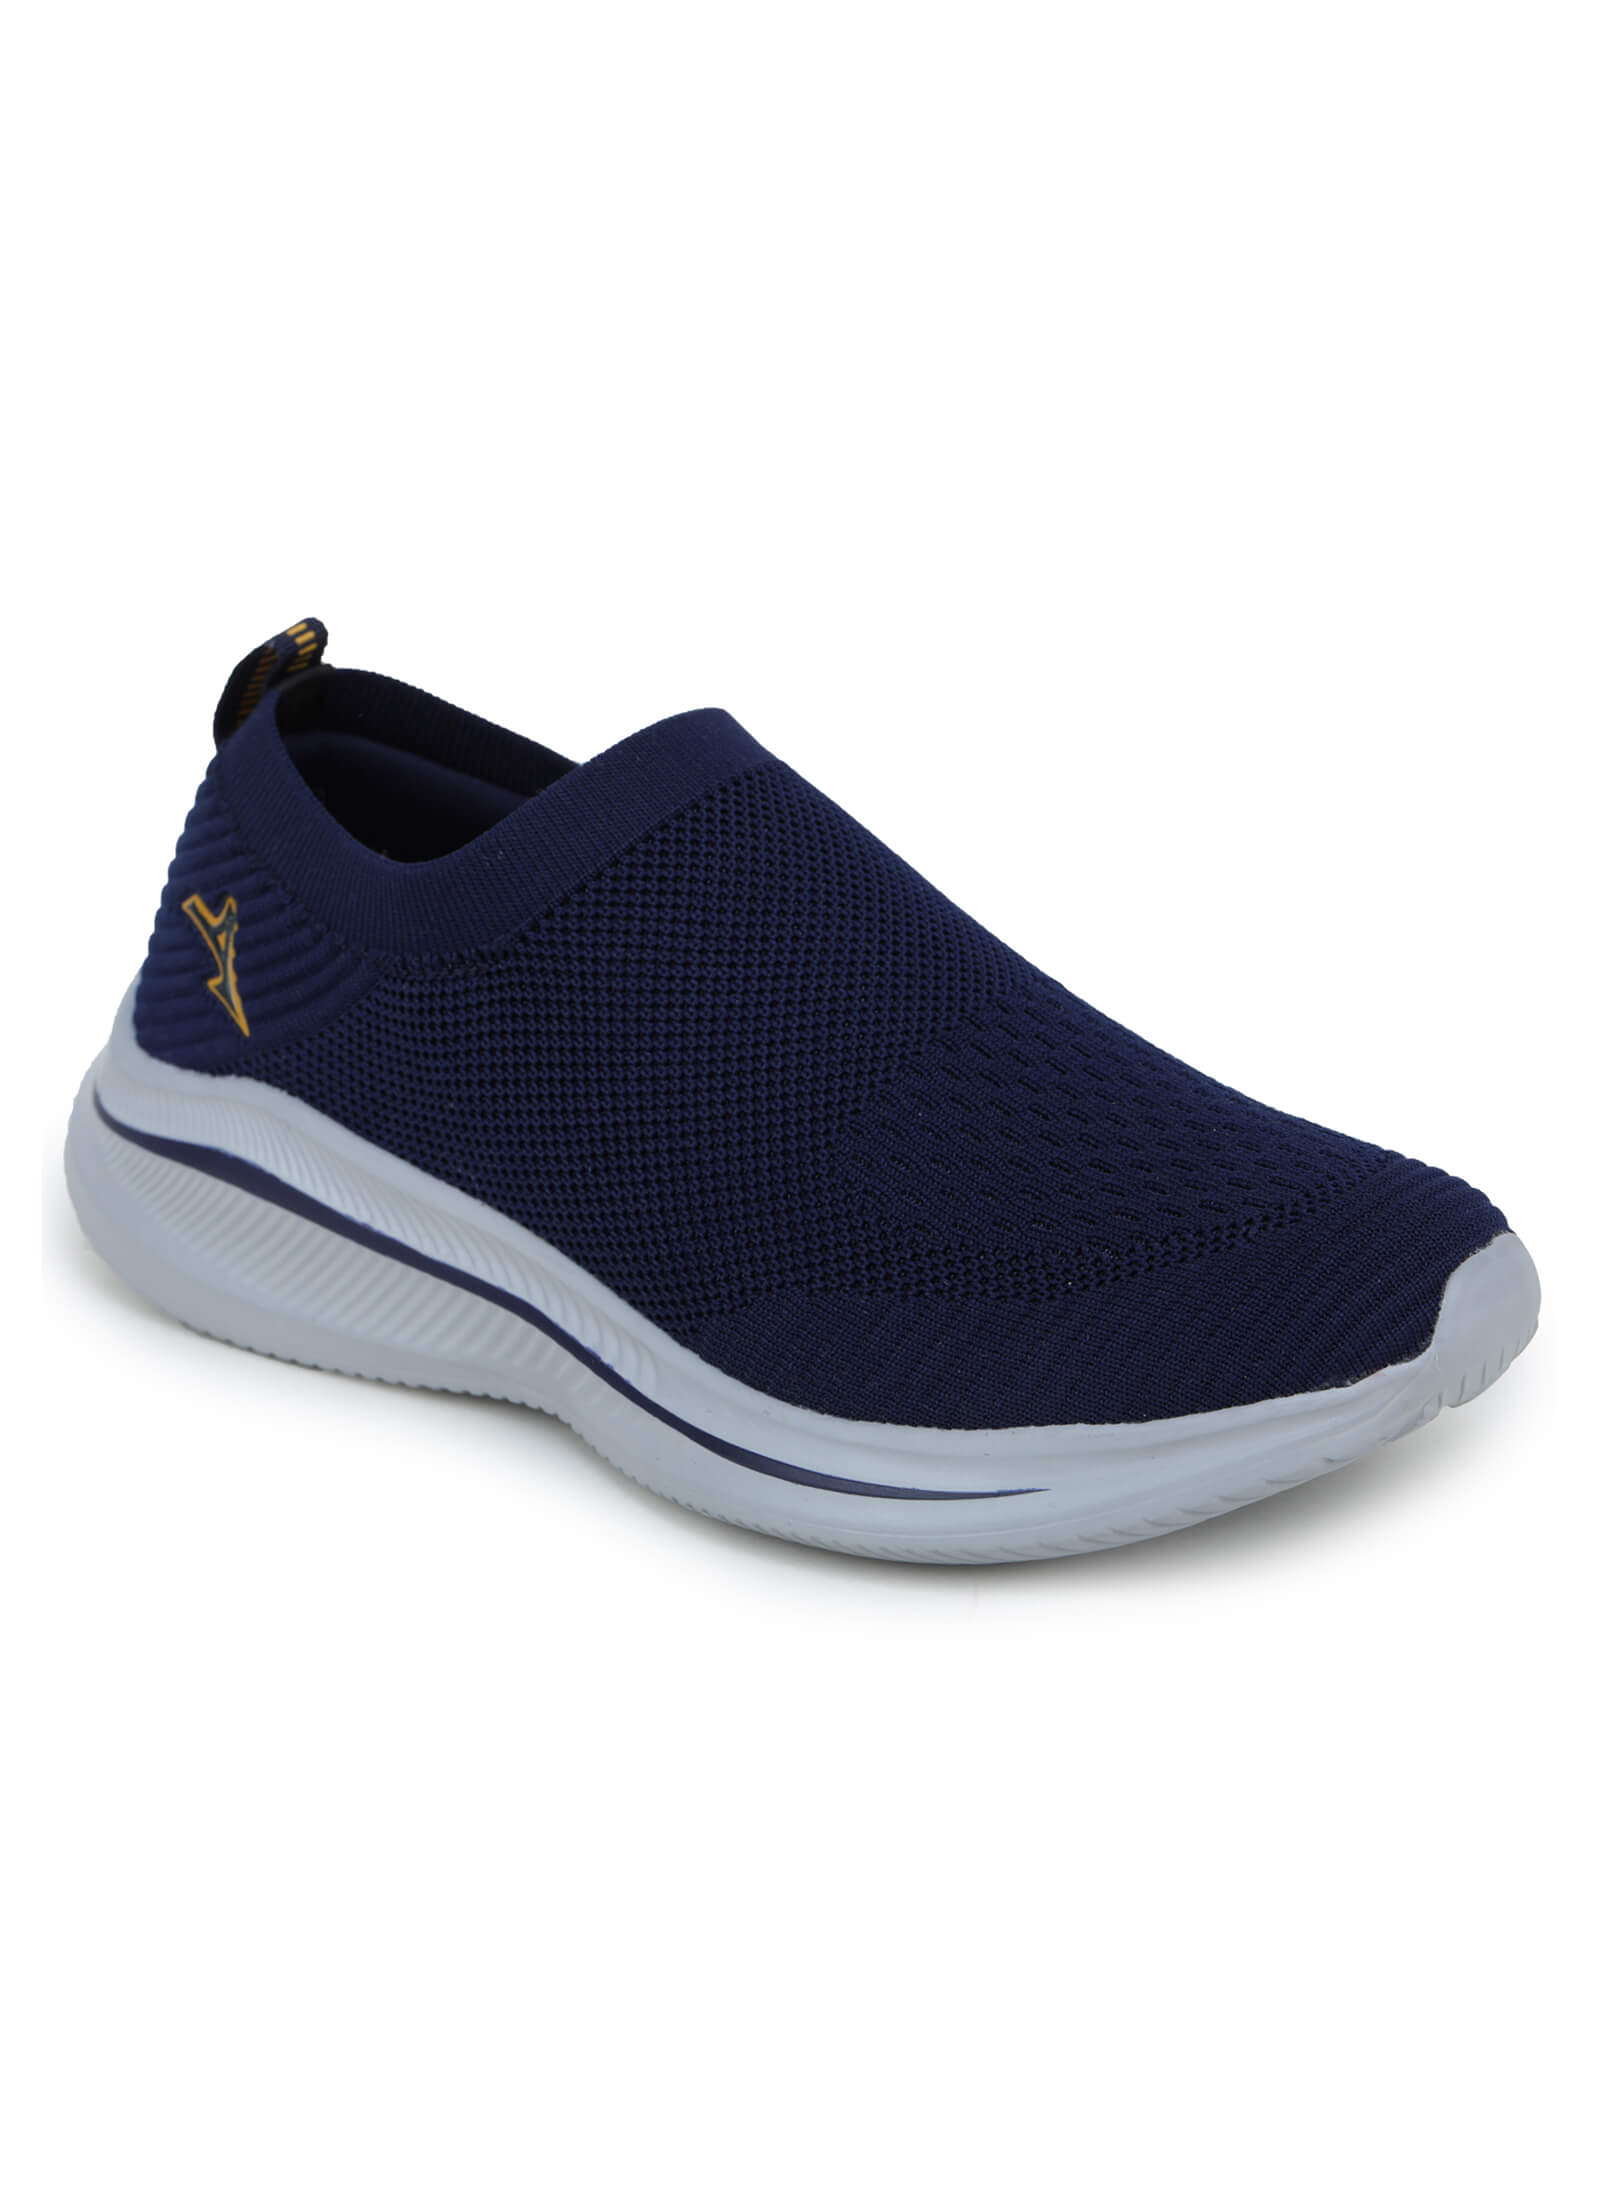 Bairstow-3 Anti-Skid Sports Shoes For Men